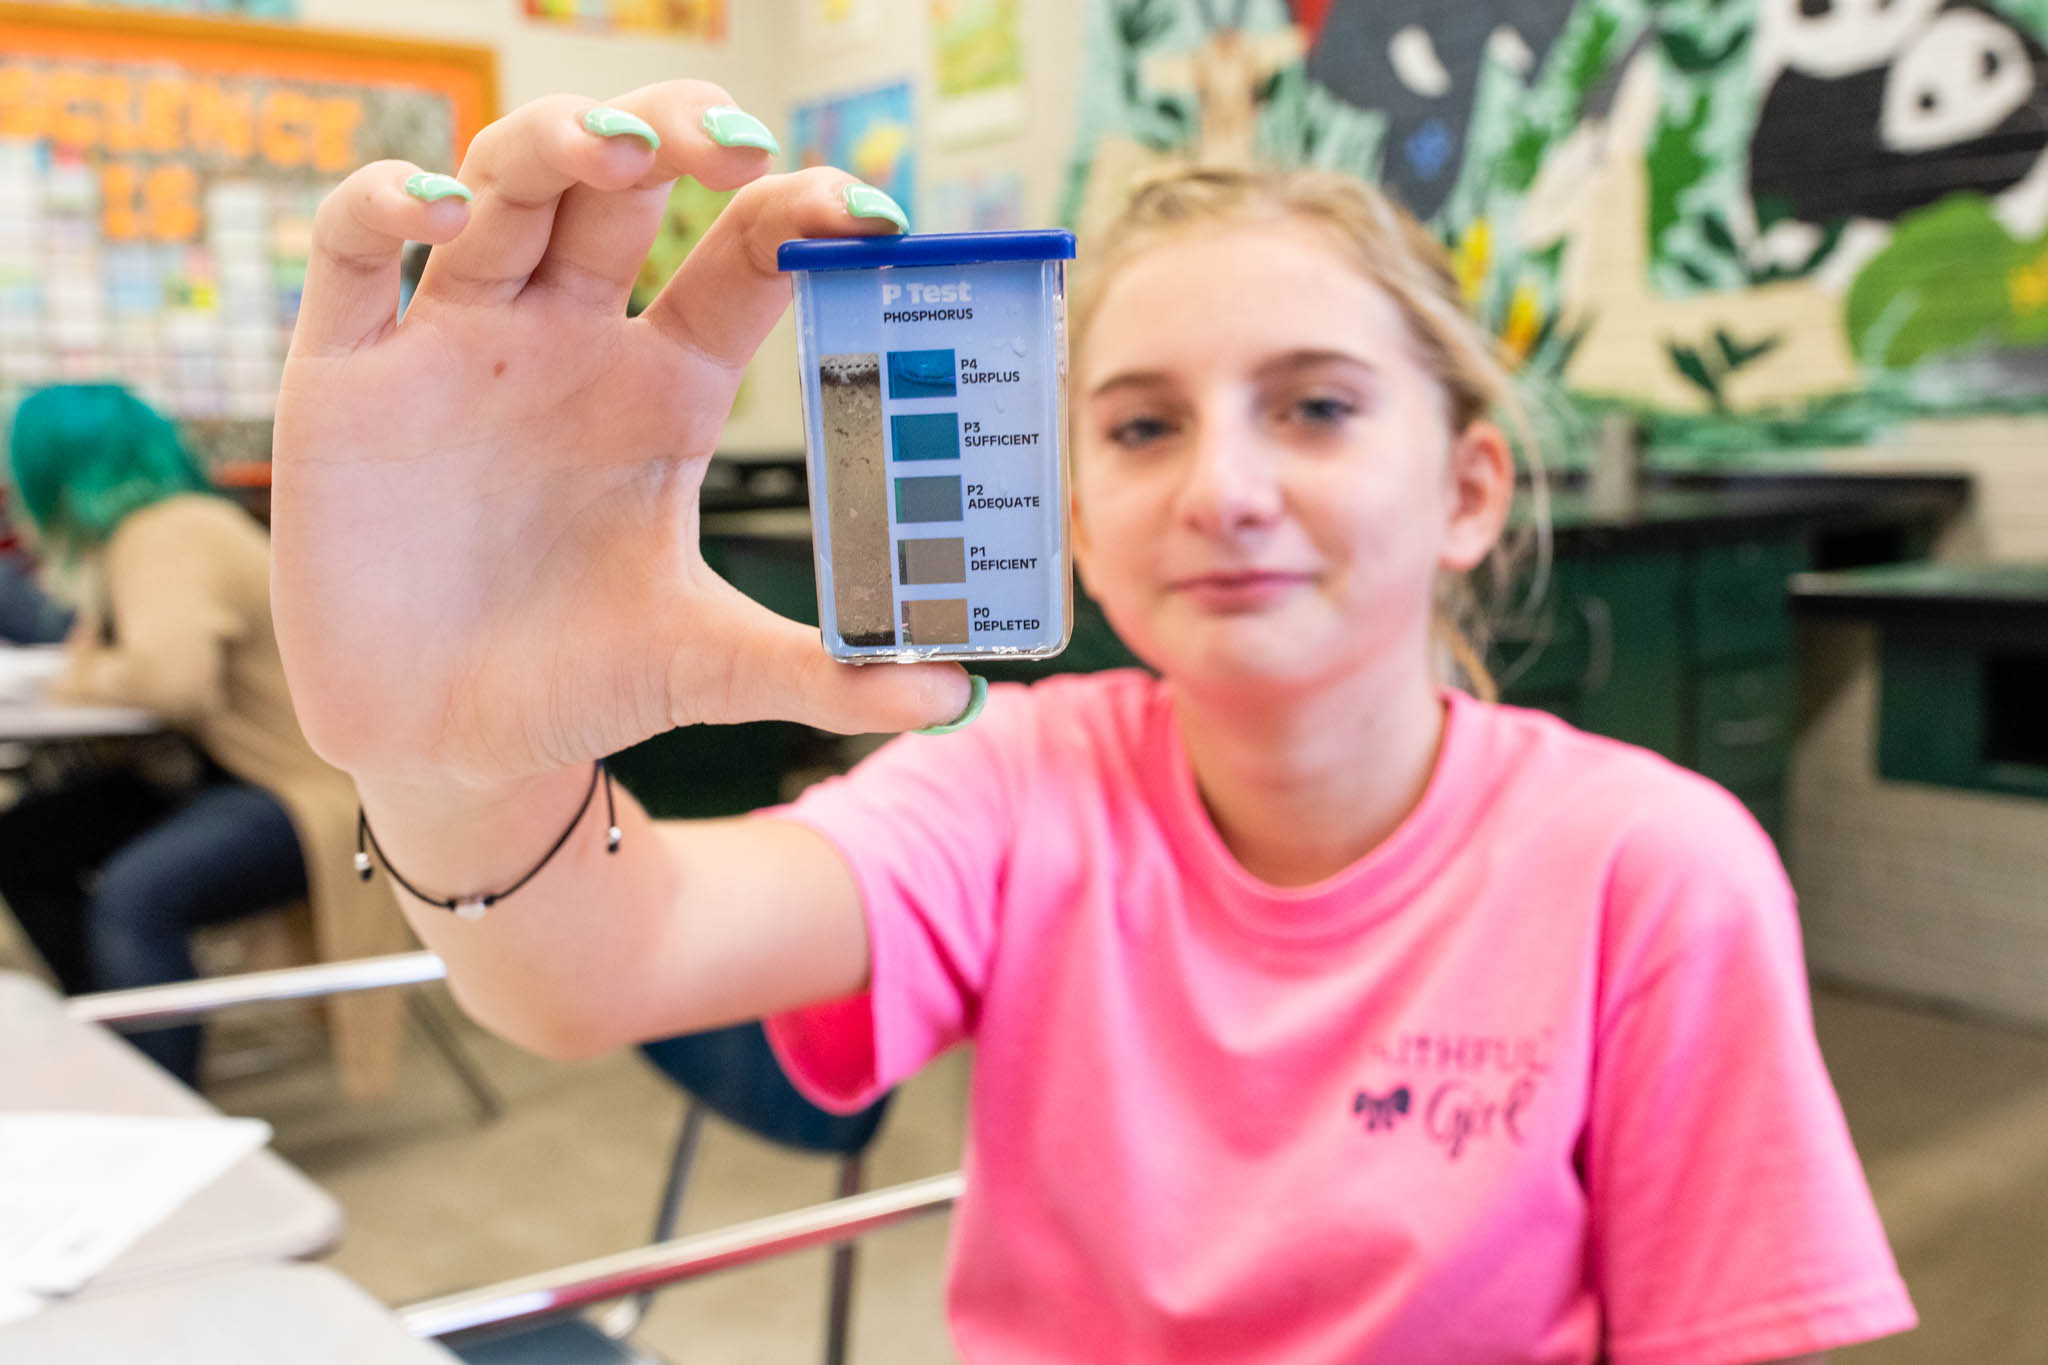 A young female student holds up a water testing plastic container for the camera.